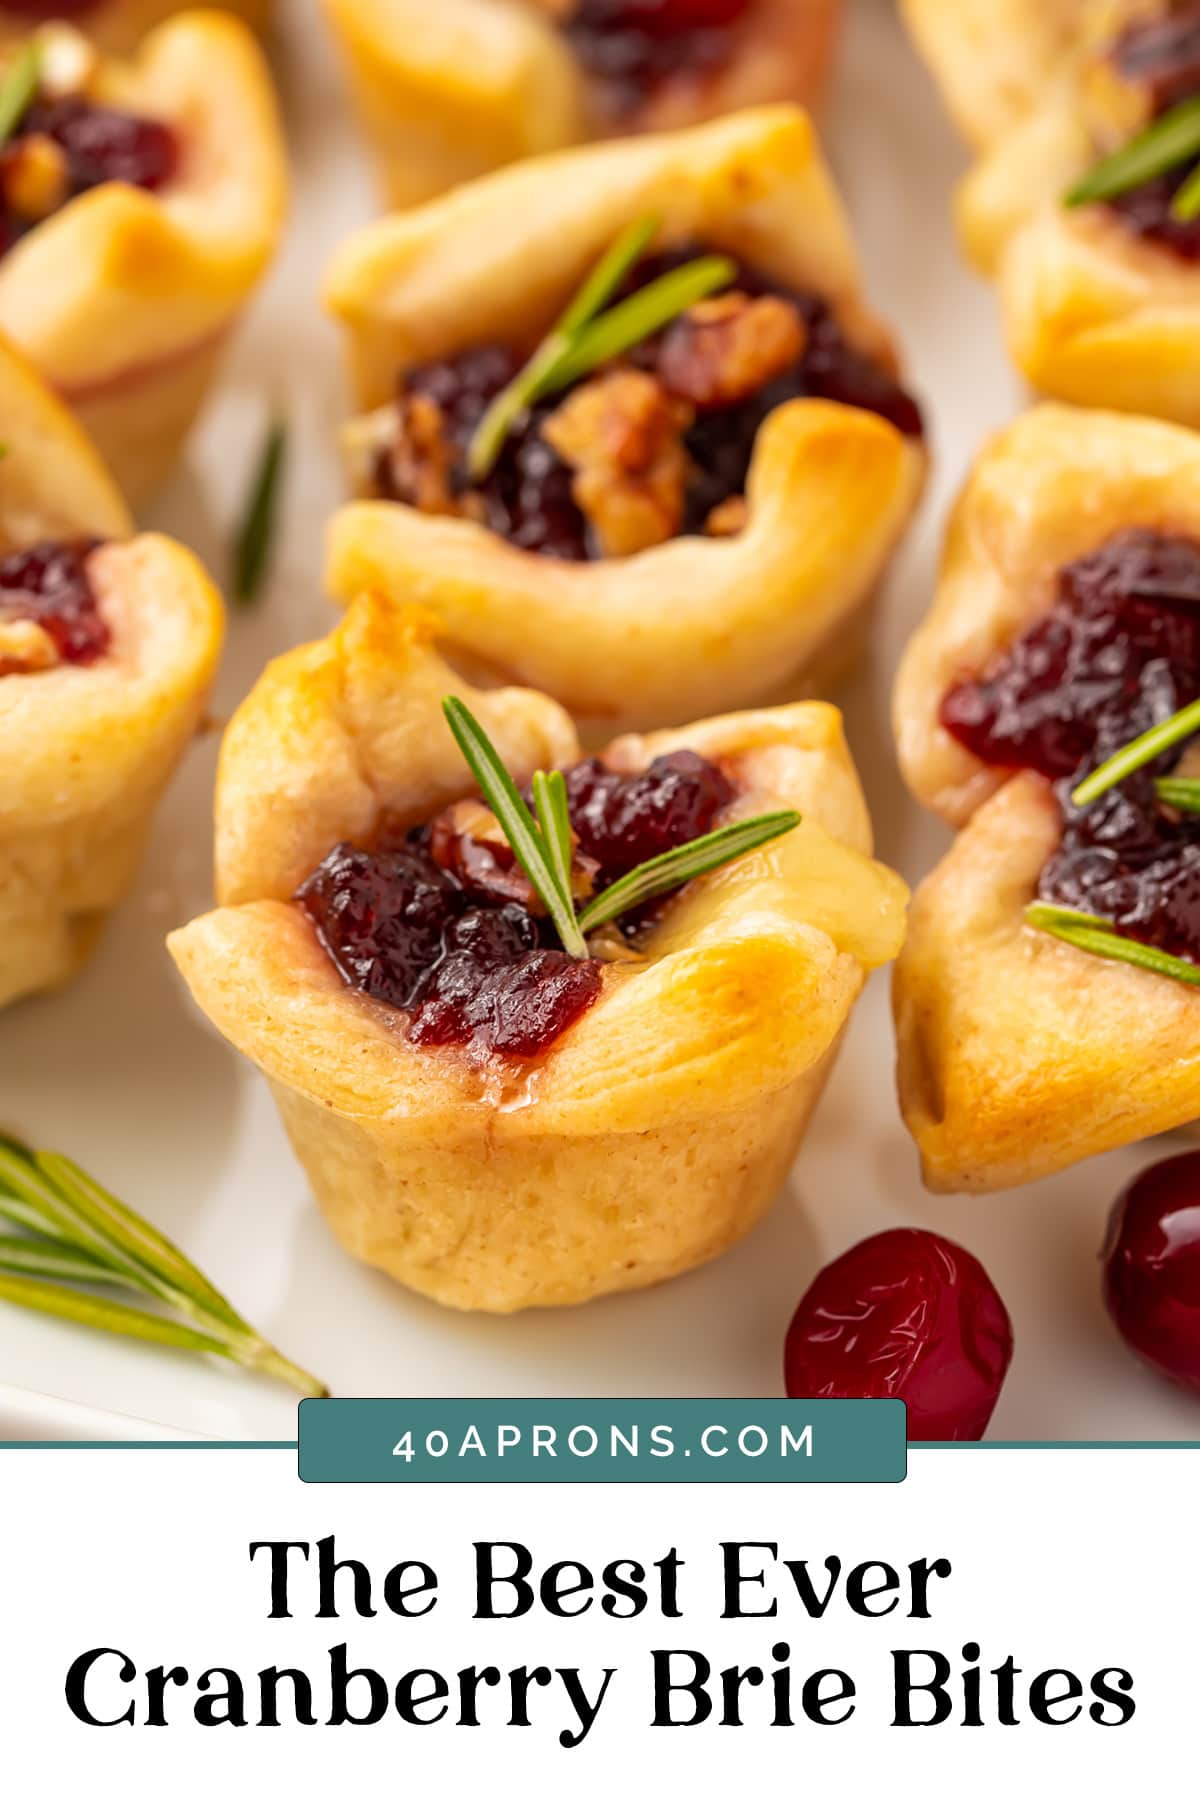 Graphic for the best cranberry brie bites.